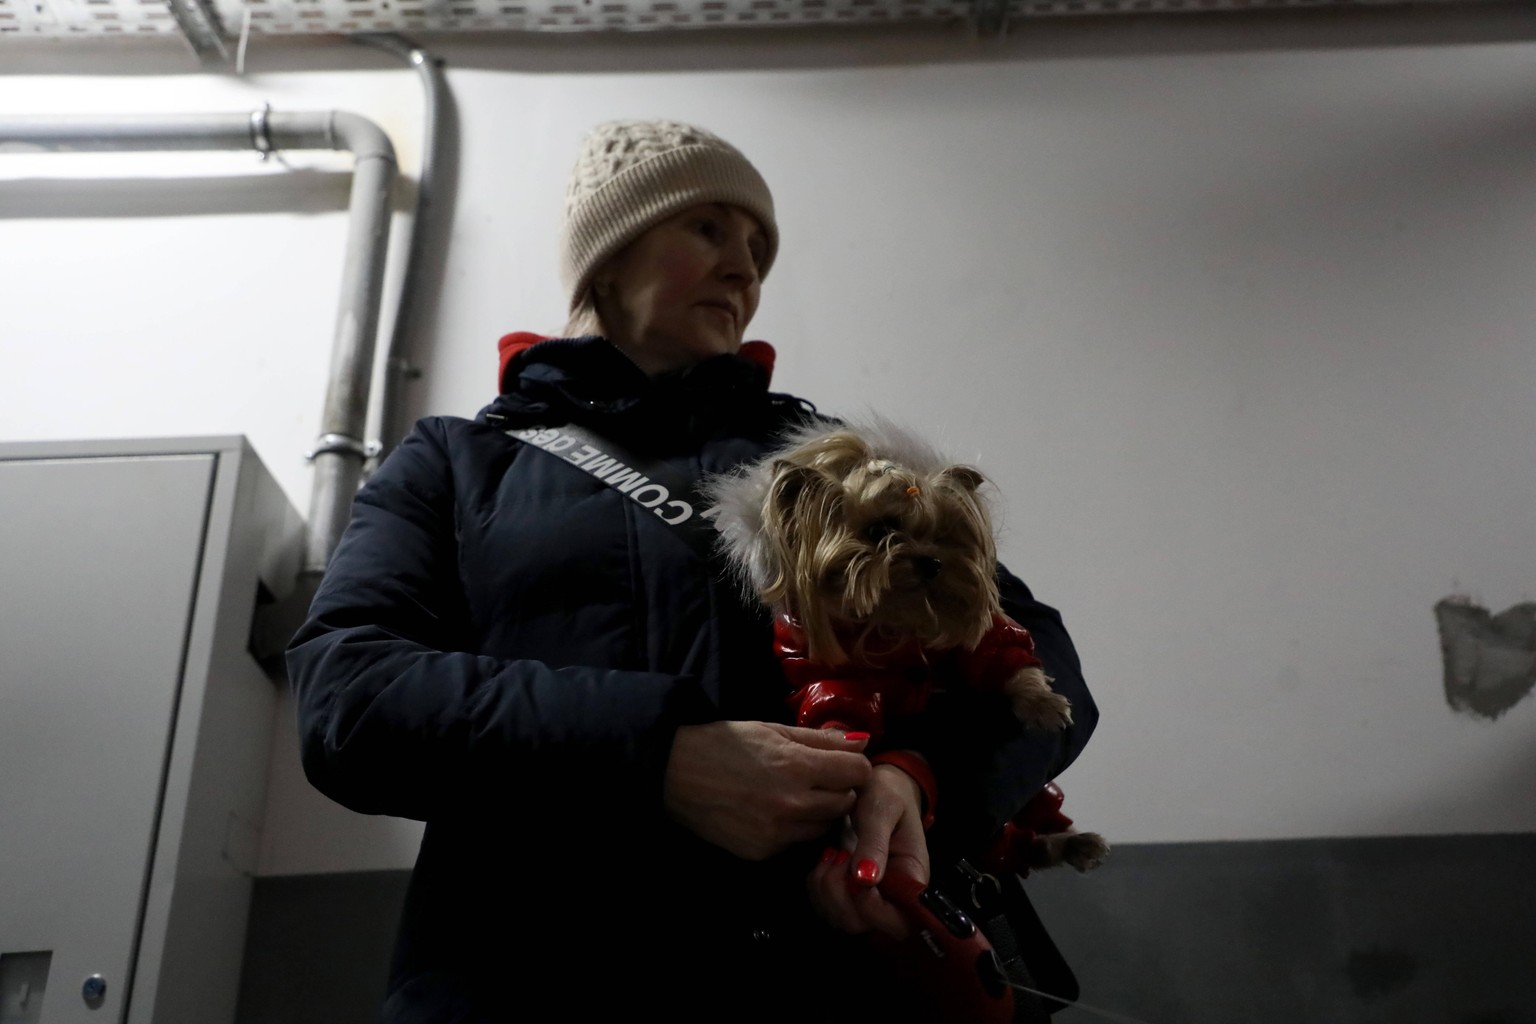 KYIV, UKRAINE - FEBRUARY 25, 2022 - A woman holds a dog in the basement of a residential tower block that doubles as a shelter on the second day of the Russian invasion, Kyiv, capital of Ukraine. Shel ...